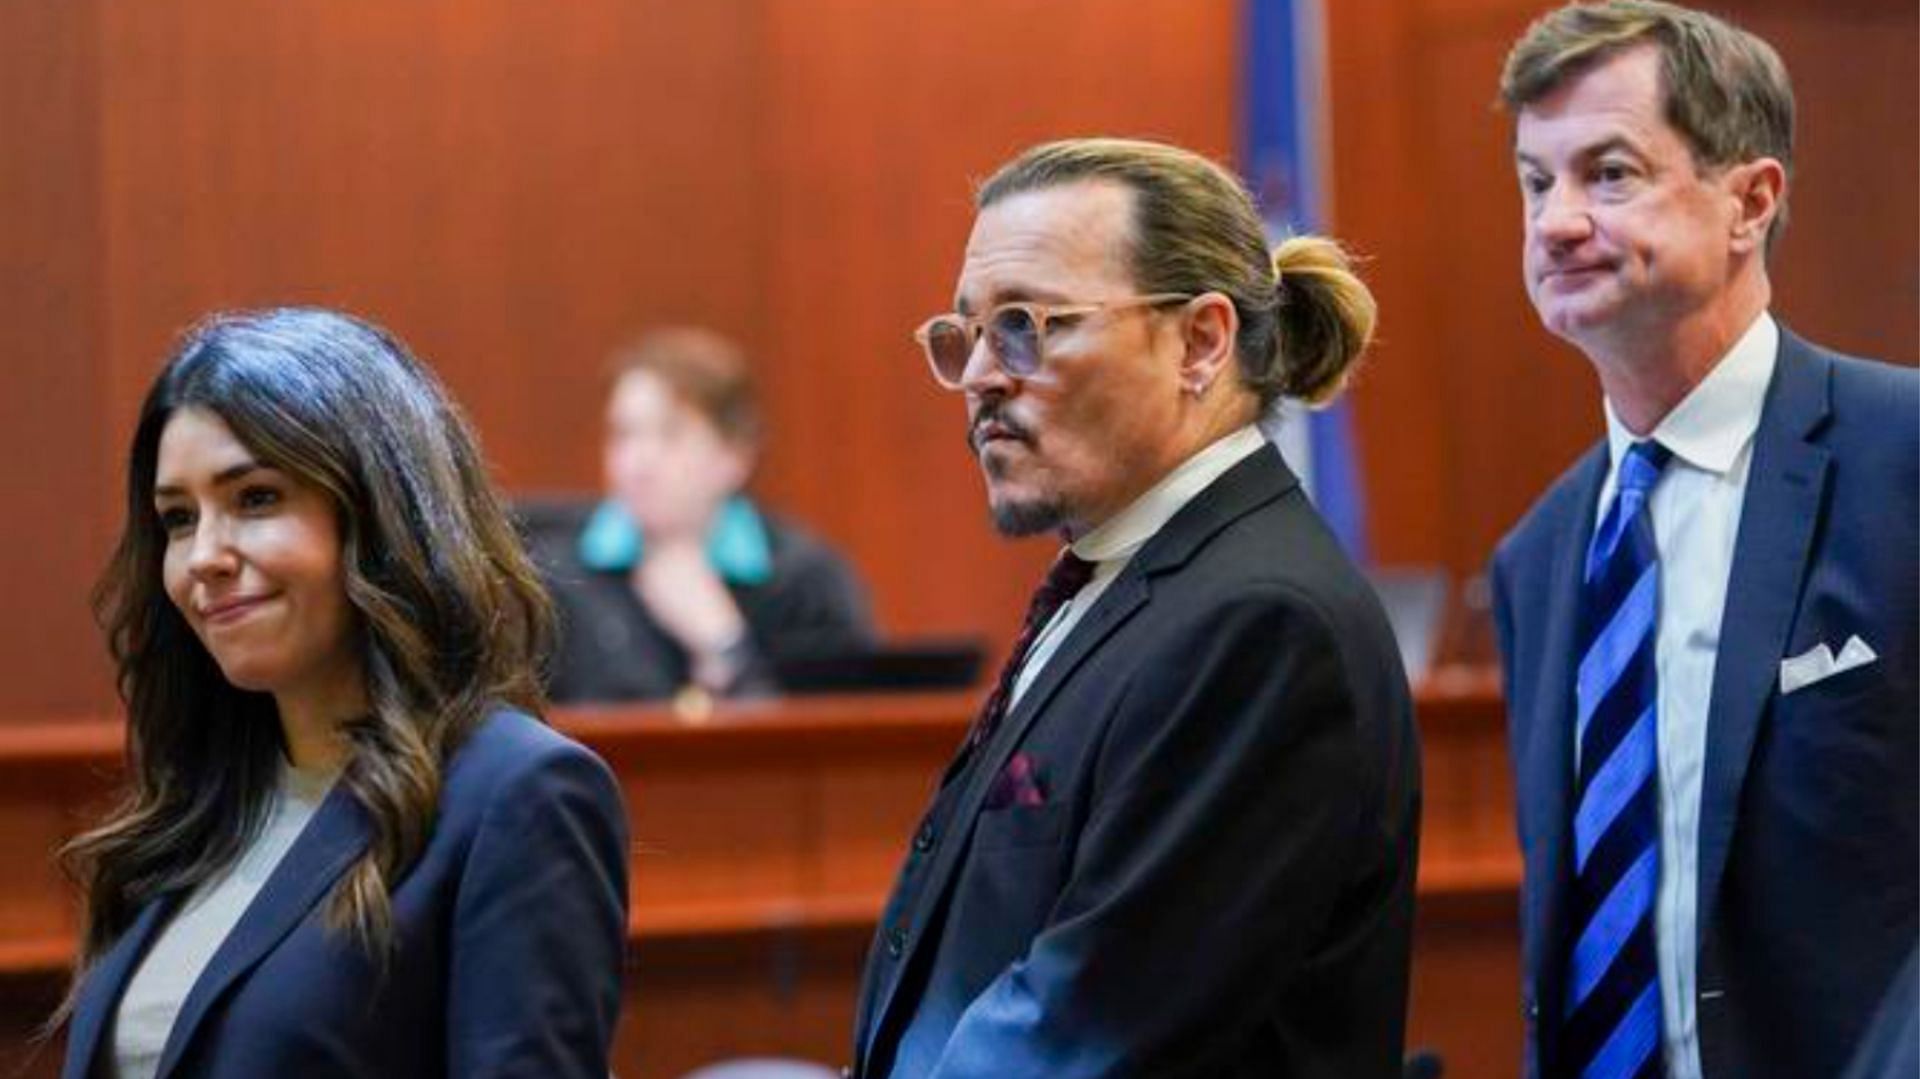 Johnny Depp&#039;s lawyers, Camille Vasquez and Ben Chew were hailed on the internet by the actor&#039;s supporters throughout the heated trial (Image via Twitter/@MattStoneABC)